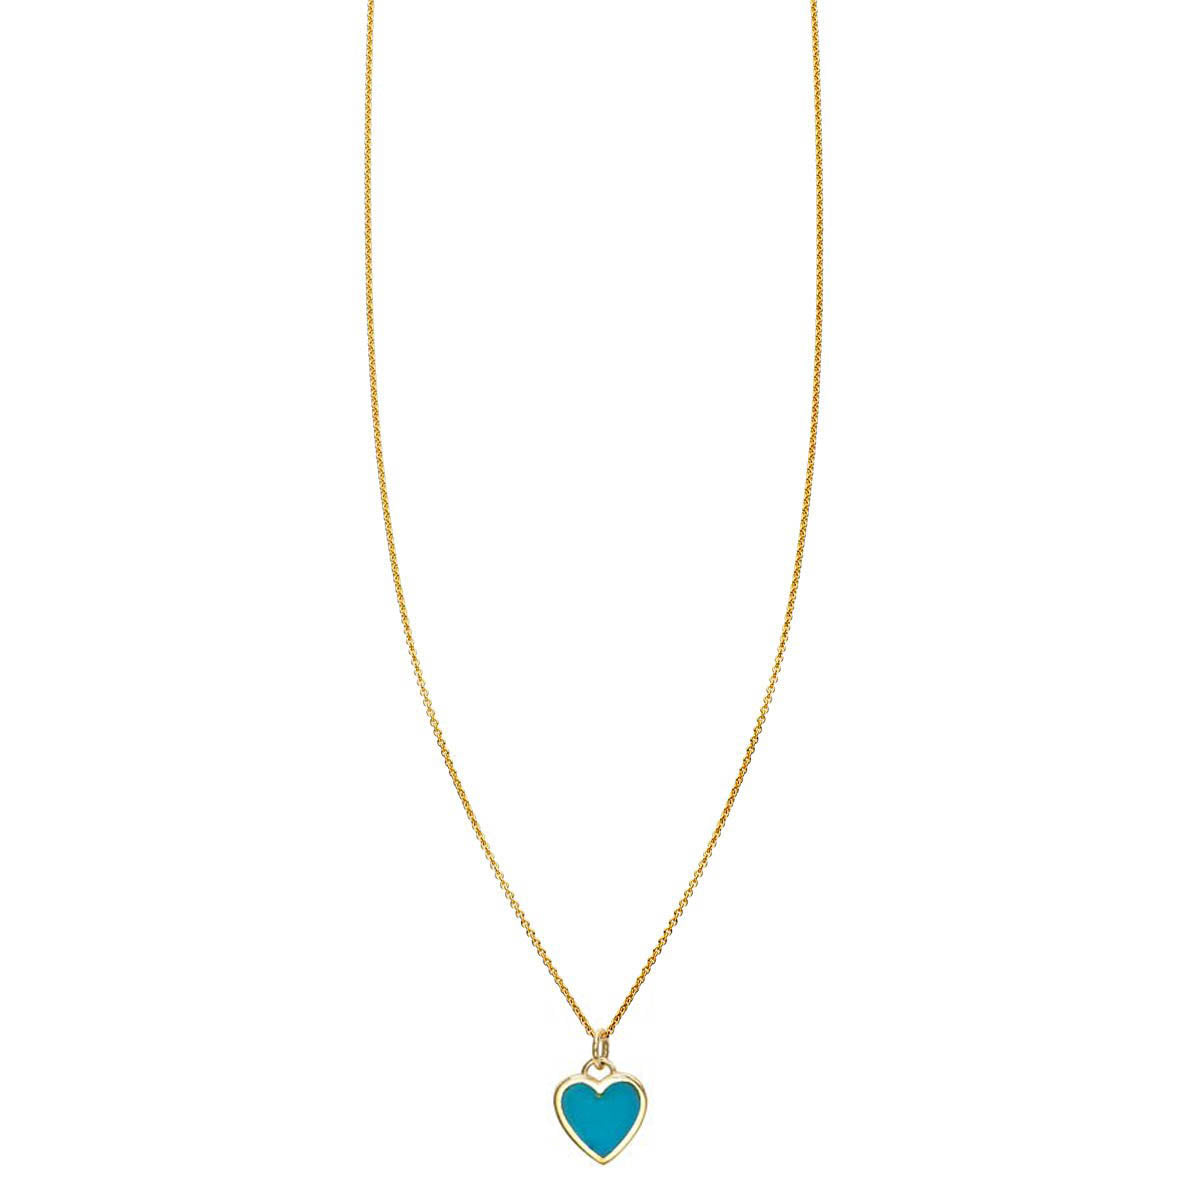 inay turquoise heart necklace PRN 502 14k